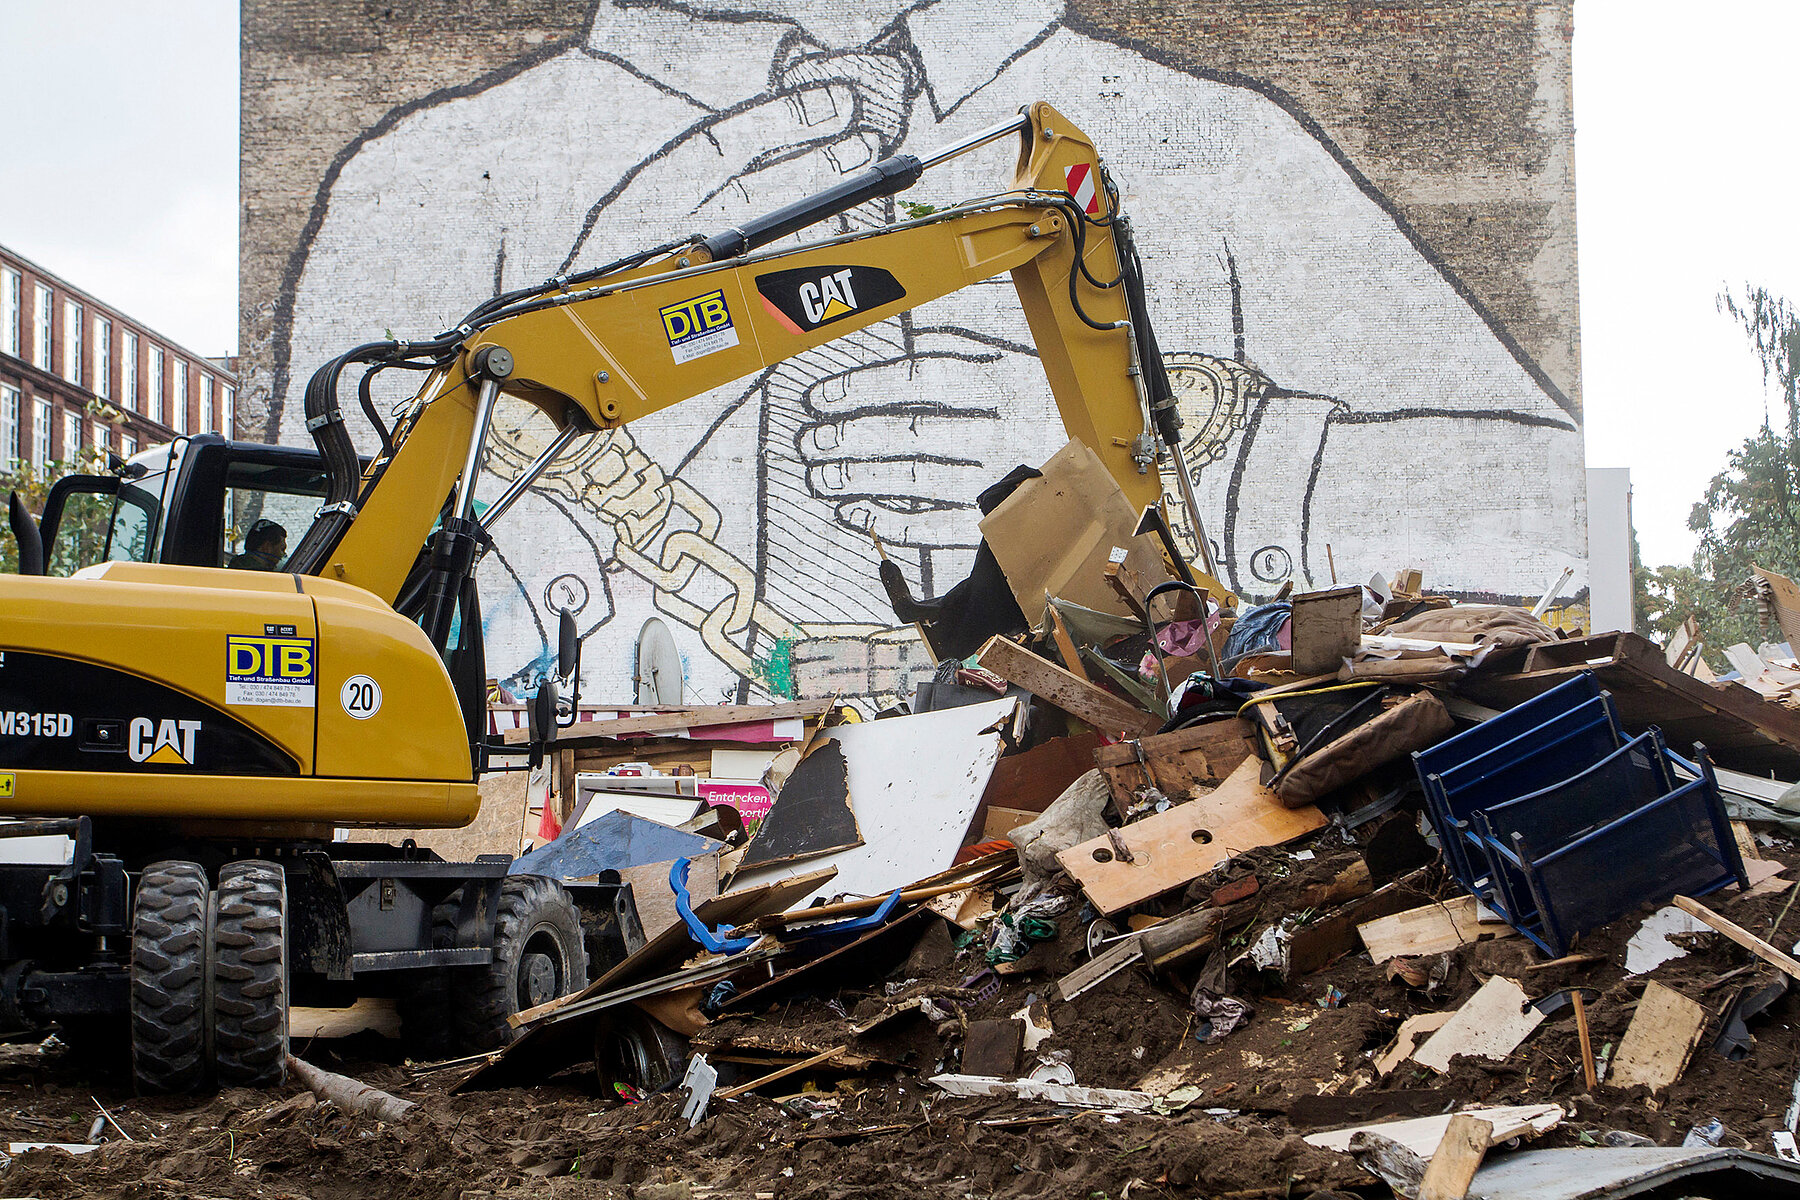 A yellow excavator, pushes bulky objects together on the Cuvry wasteland, behind it is a house wall with a mural of a person painted in white, wearing gold watches on both wrists, linked by a chain.